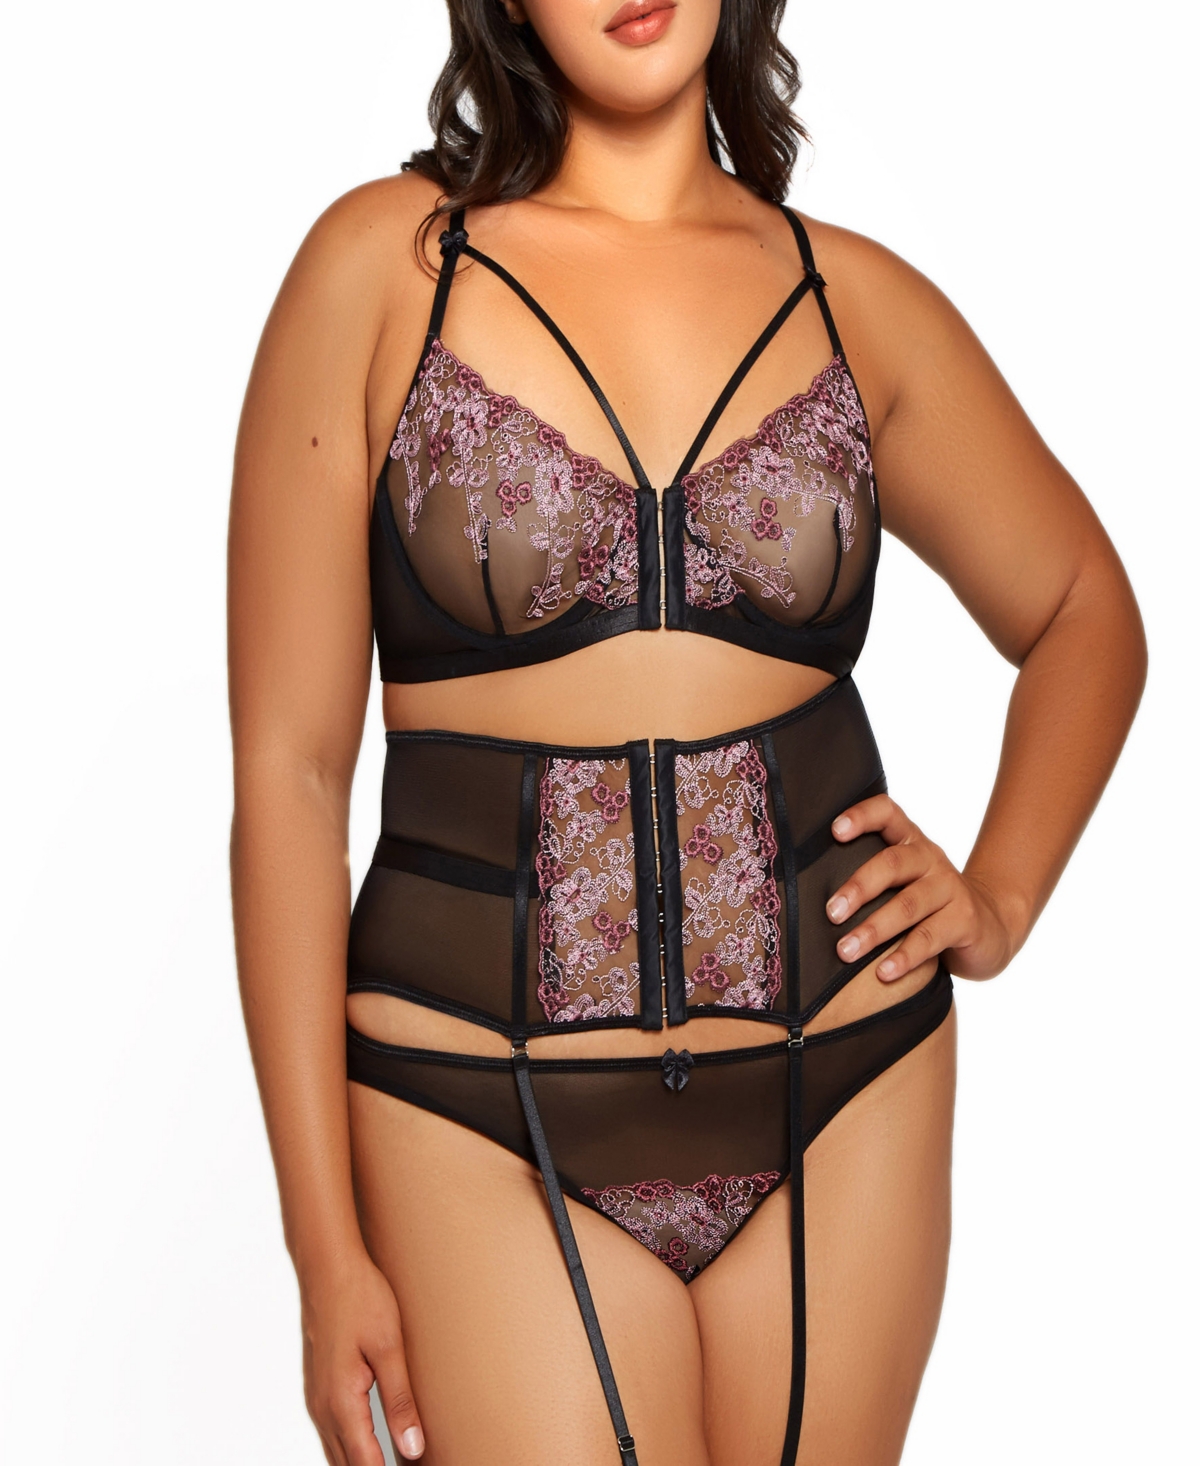 Plus Size Rosemary Lace and Mesh Bralette, Waist Cincher And Panty 3pc Lingerie Set - Fuchsia-Black